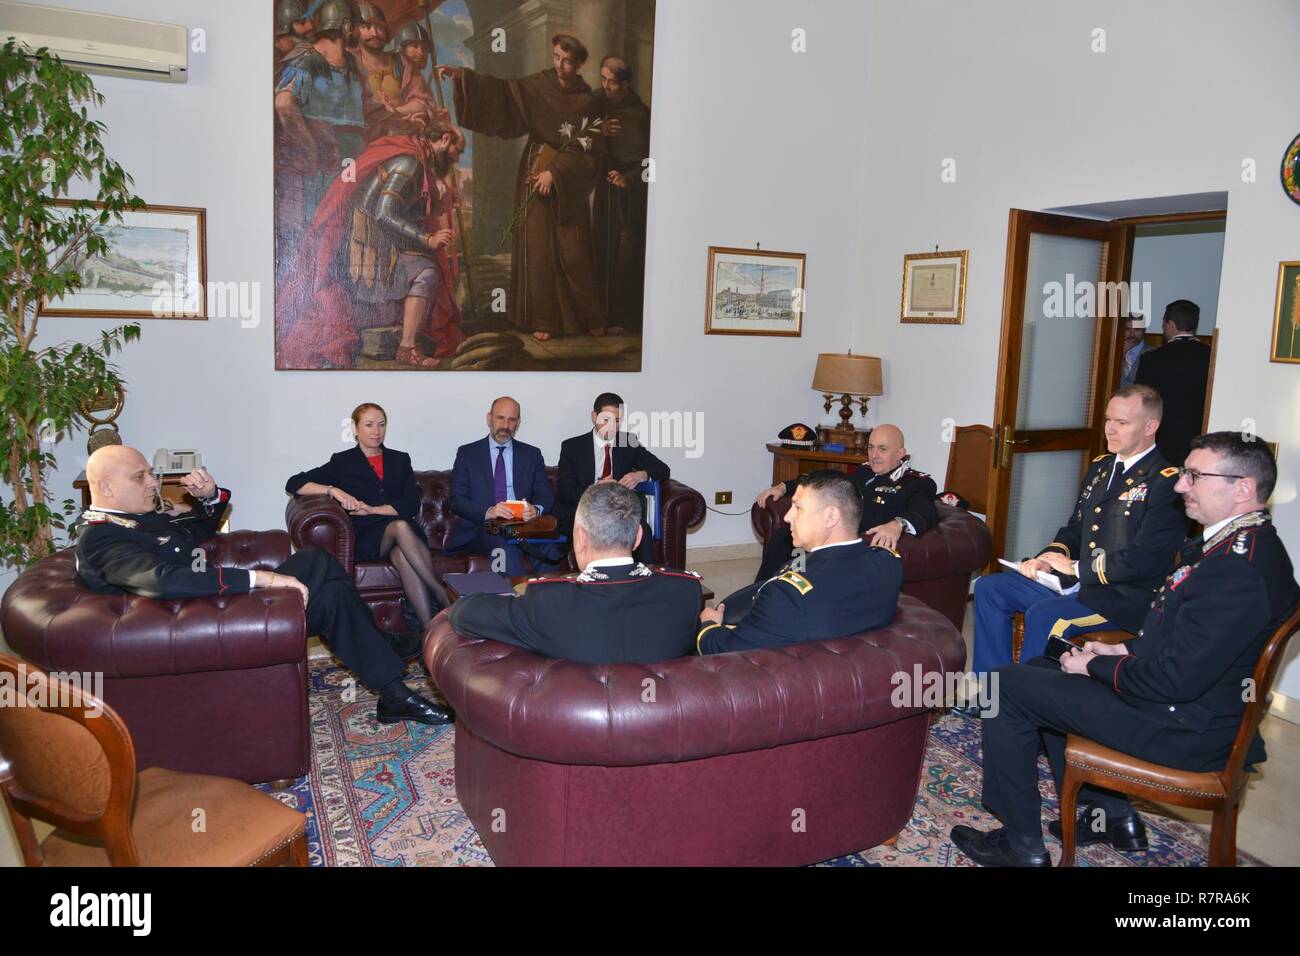 Ms. Kelly Degnan, Charge’ d’Affaires ad interim U.S. Embassy & Consulates Italy, meets Lt. Gen Vincenzo Coppola (left), Commanding General “Palidoro” Carabinieri Specialized, and CoESPU staff,  during visit at Center of Excellence for Stability Police Units (CoESPU) Vicenza, Italy, Mar. 30, 2017. Stock Photo